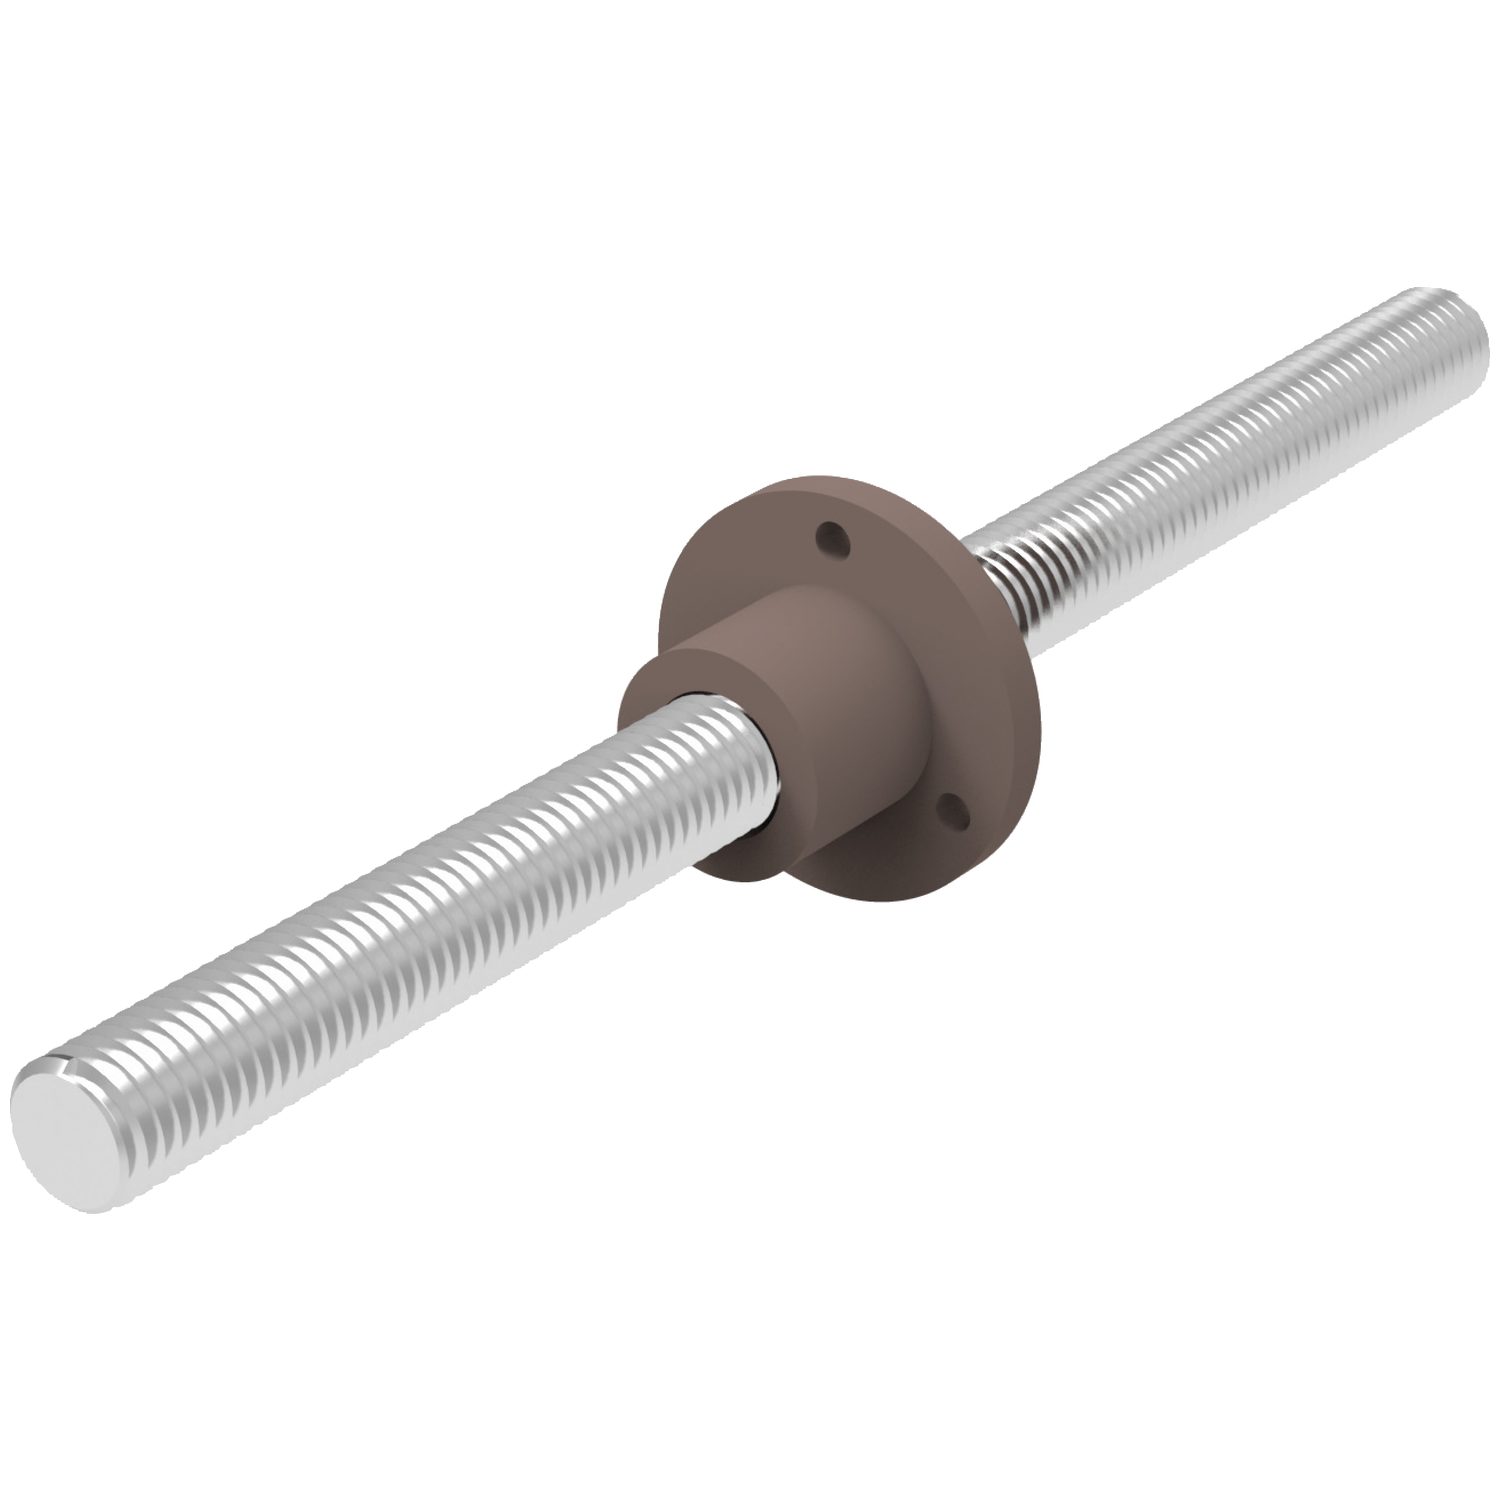 Round Nut Lead Screws Anodized aluminium or 416 stainless steel screw with round acetal resin nut. It is suited to dry atmospheres, fresh water and mild alkalis and acids. Nut fitted to screw to ensure anti-backlash.